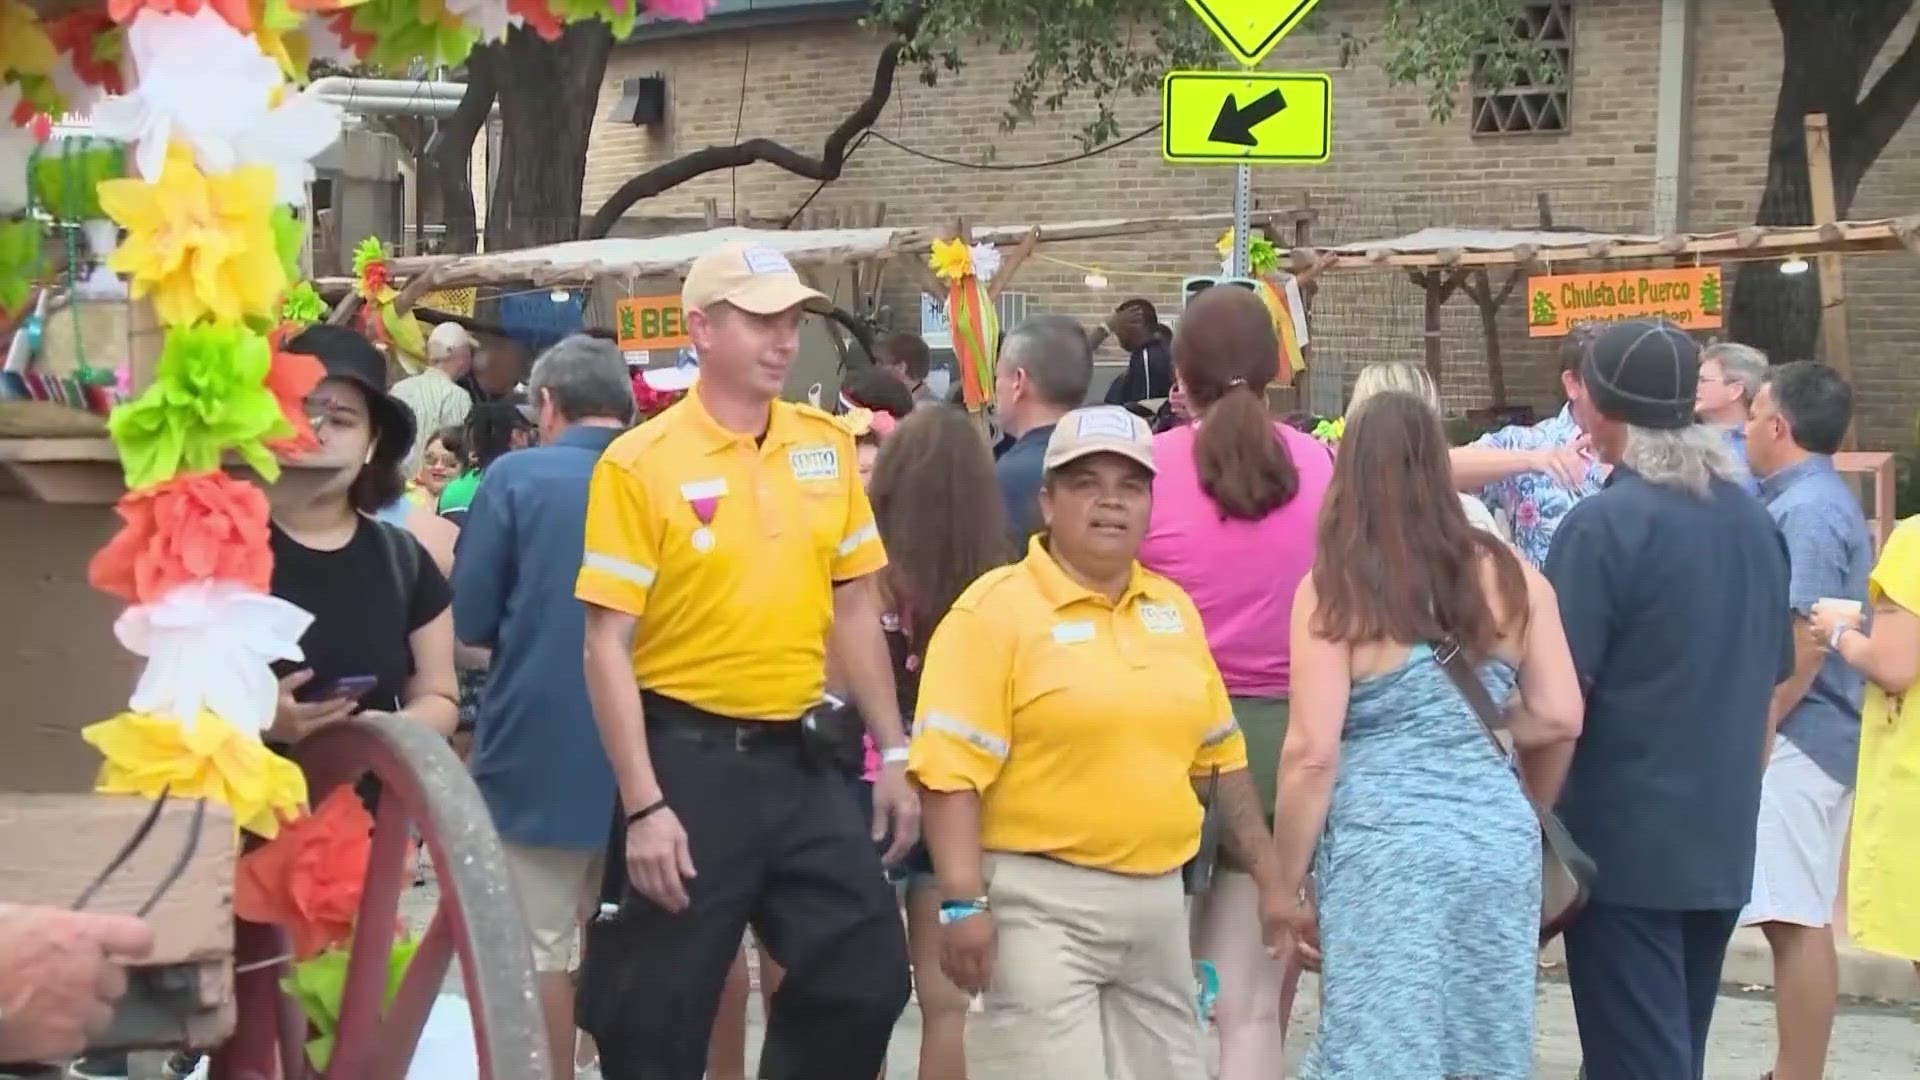 With thousands expected to flood downtown as Fiesta kicks off this week, the City of San Antonio is urging the public to plan ahead for traffic detours and parking.